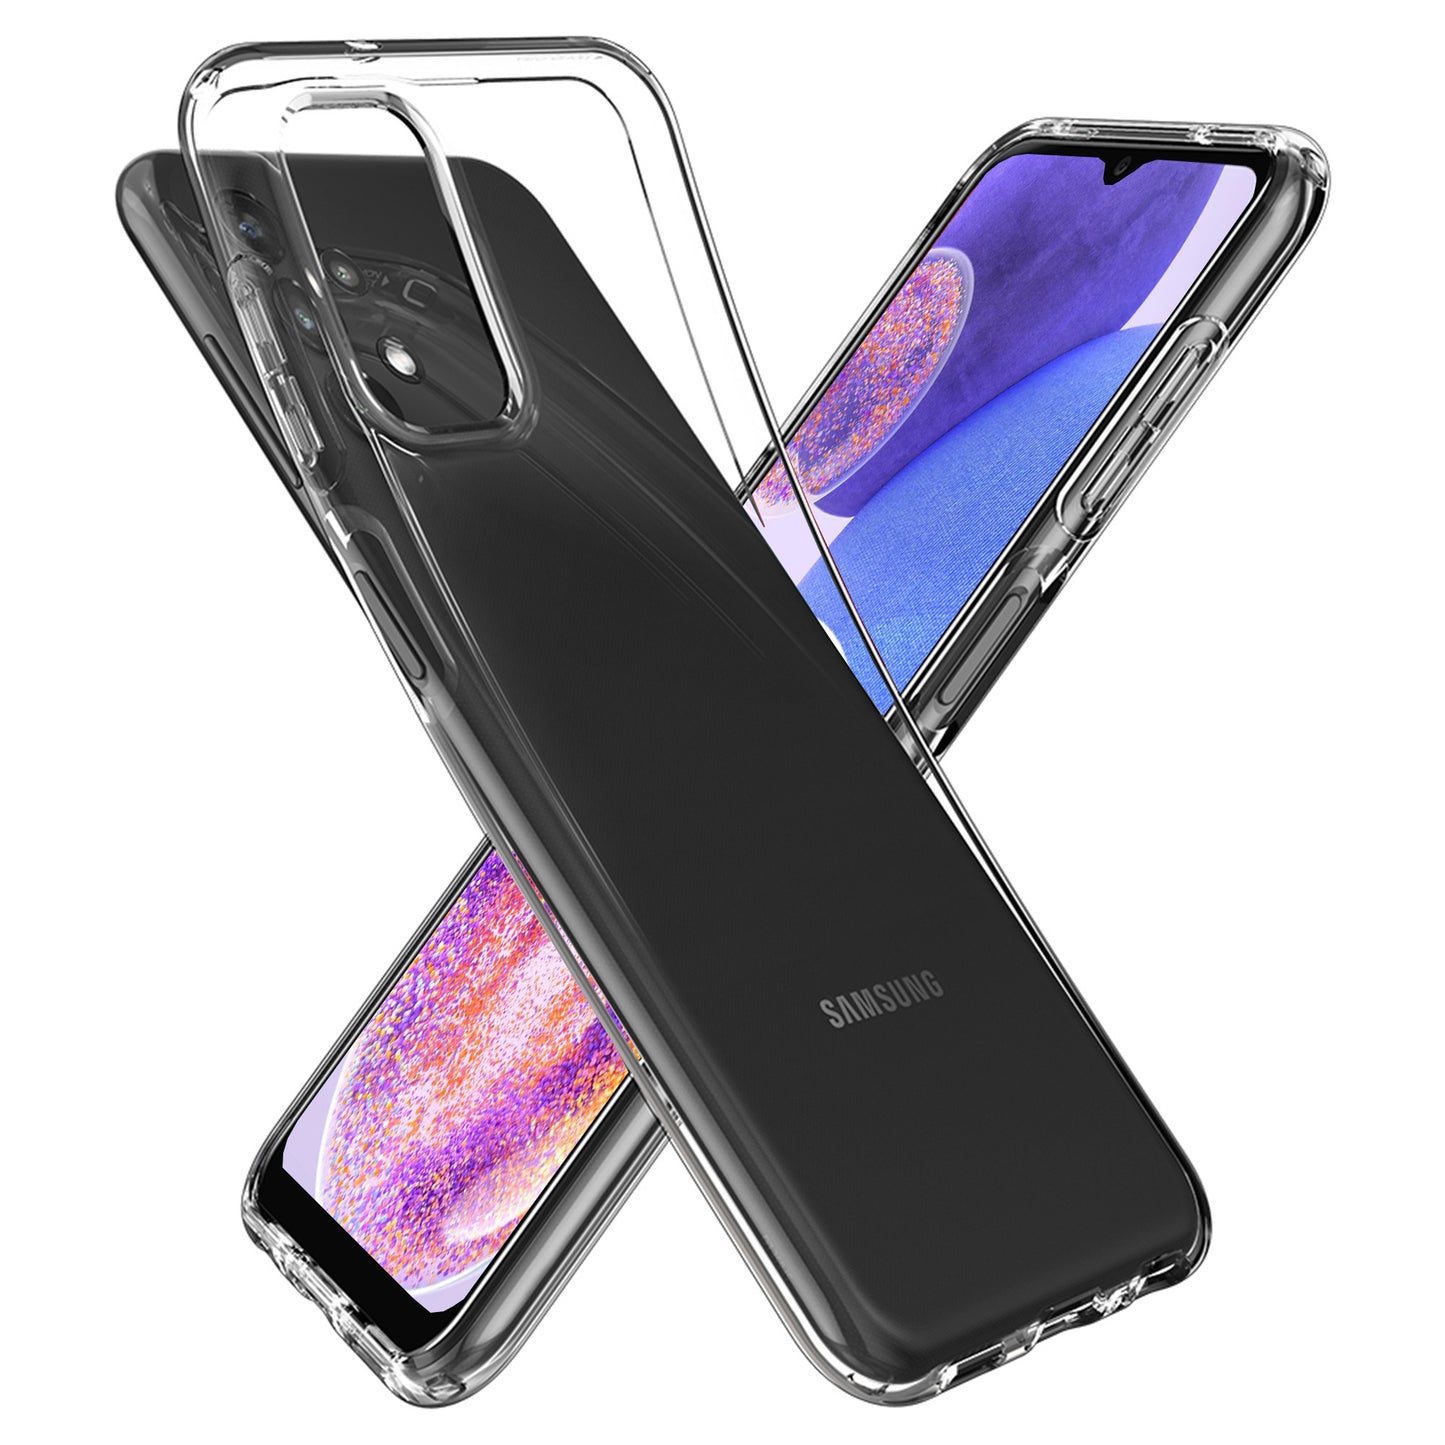 MEZON Galaxy A23 Ultra Slim Crystal Clear Premium TPU Gel Back Case – Shock Absorption, Wireless Charging Compatible